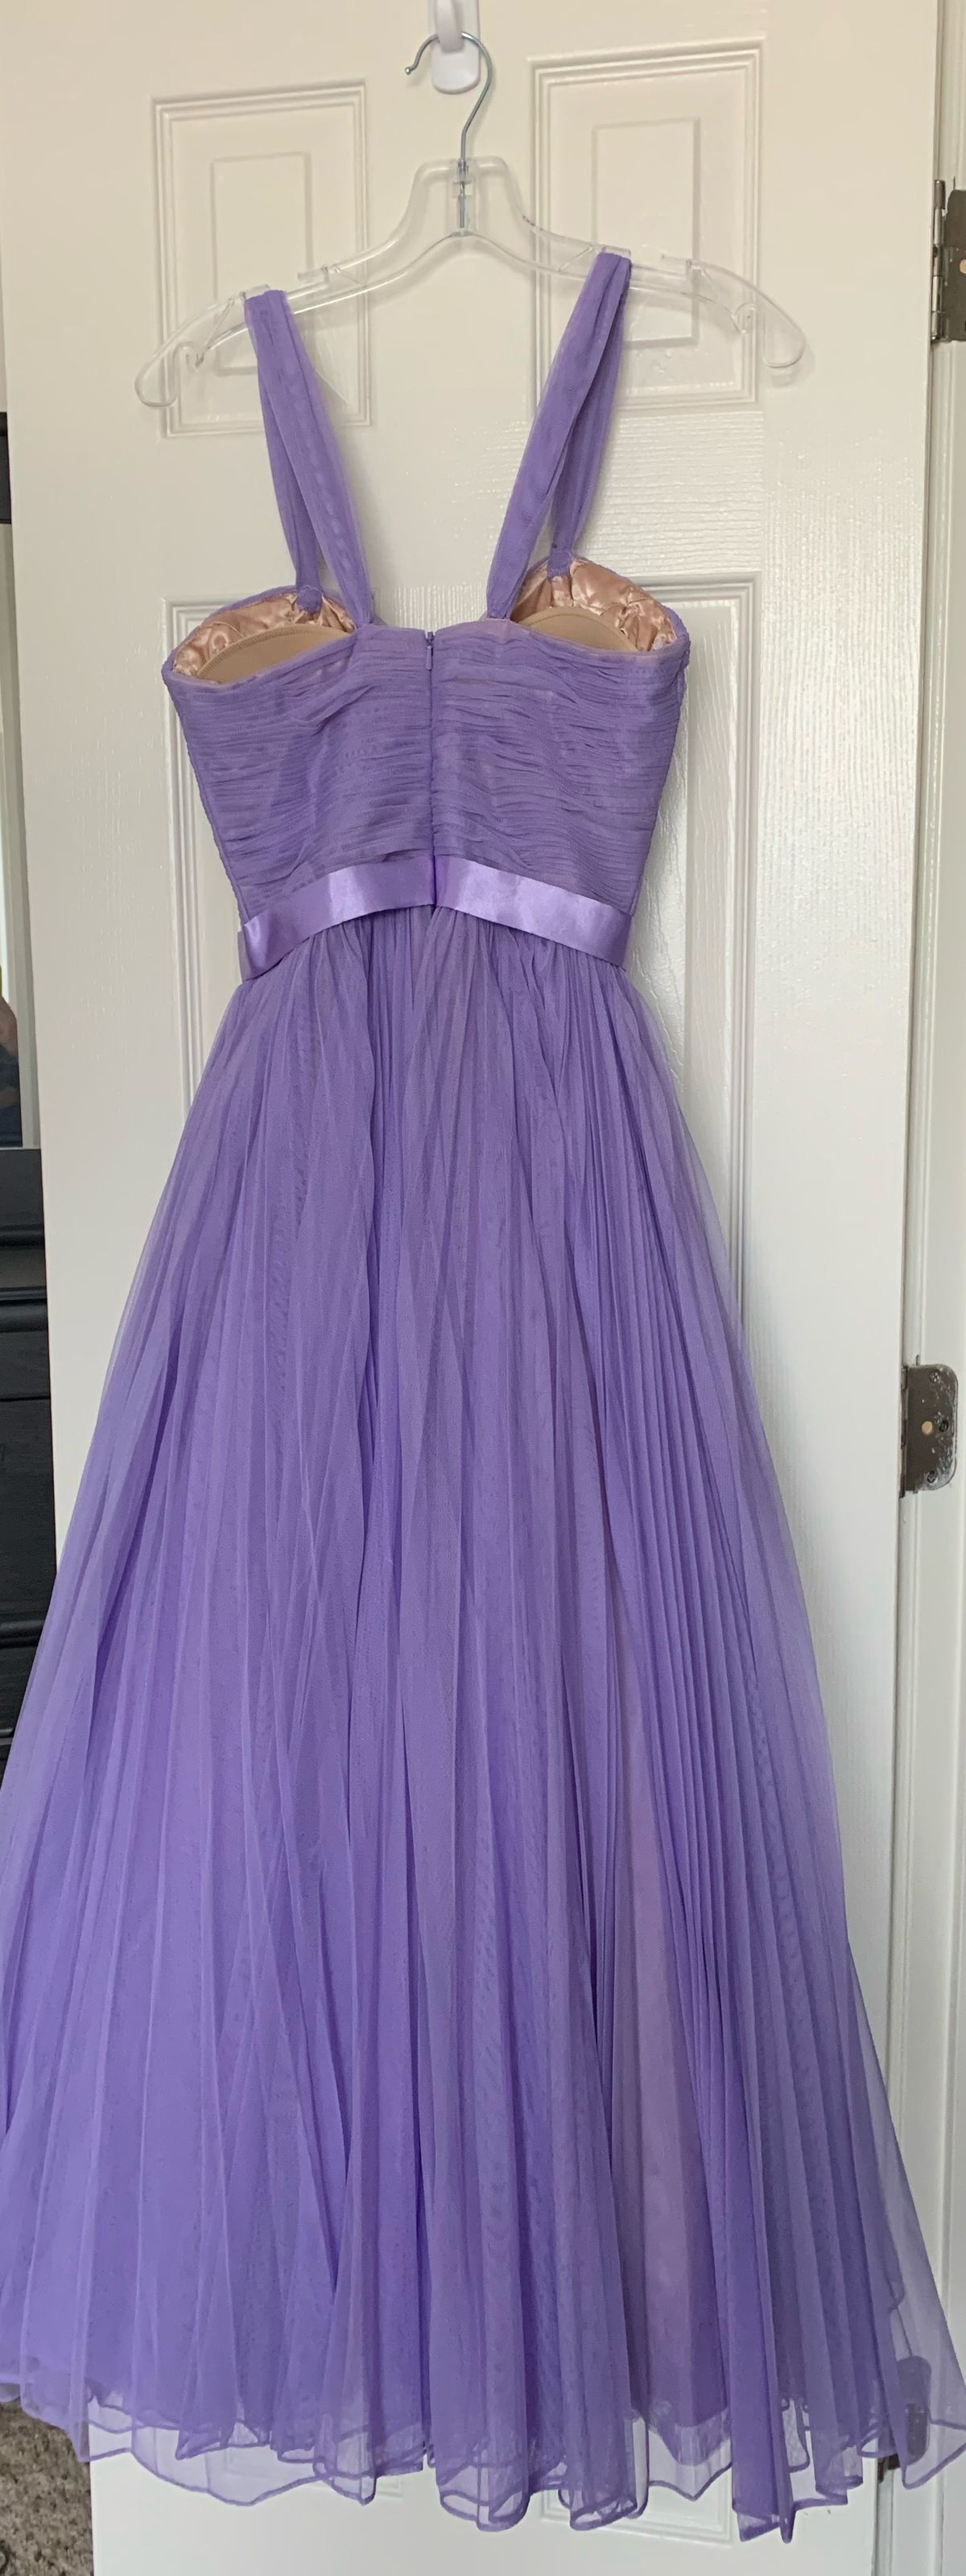 Jovani Size 2 Bridesmaid Satin Light Purple Ball Gown on Queenly